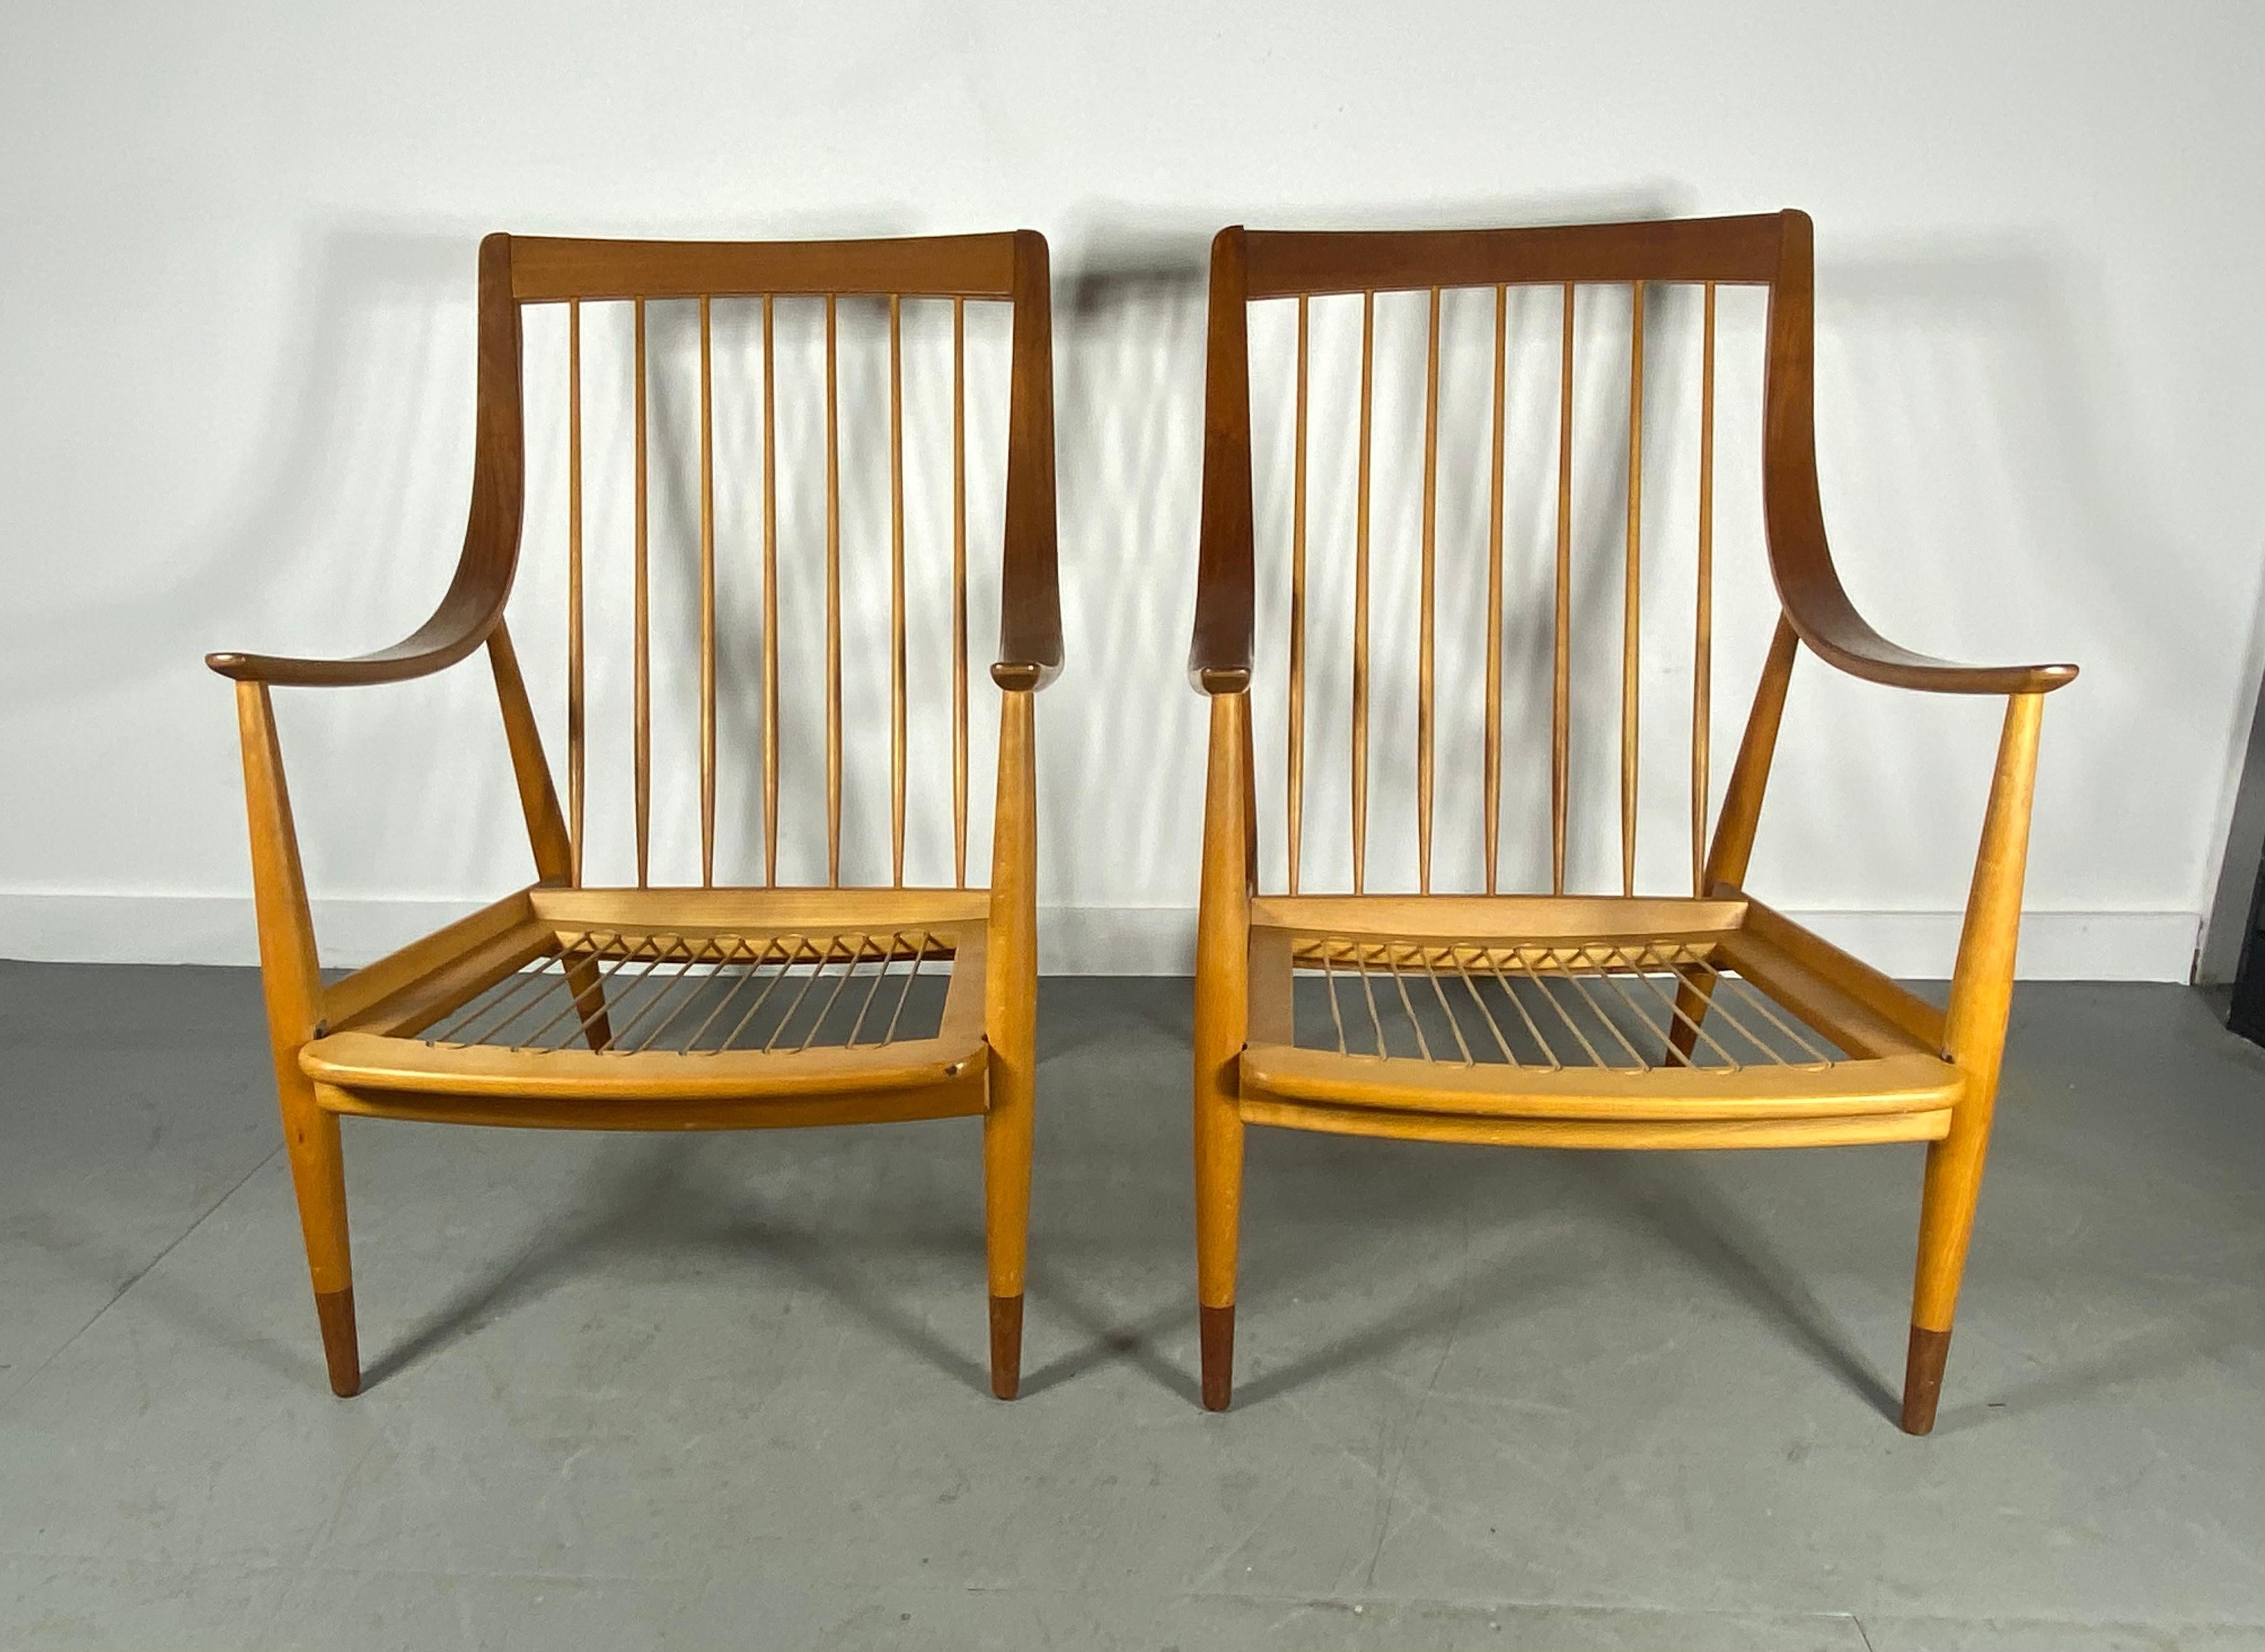 Beautiful Pair of Peter Hvidt & Orla Mølgaard-Nielsen easy chairs for France & Daverkosen made in Denmark, circa 1950s. This stunning chair was designed with the highest quality of teak. The chair features laminated bentwood curvilinear arms and